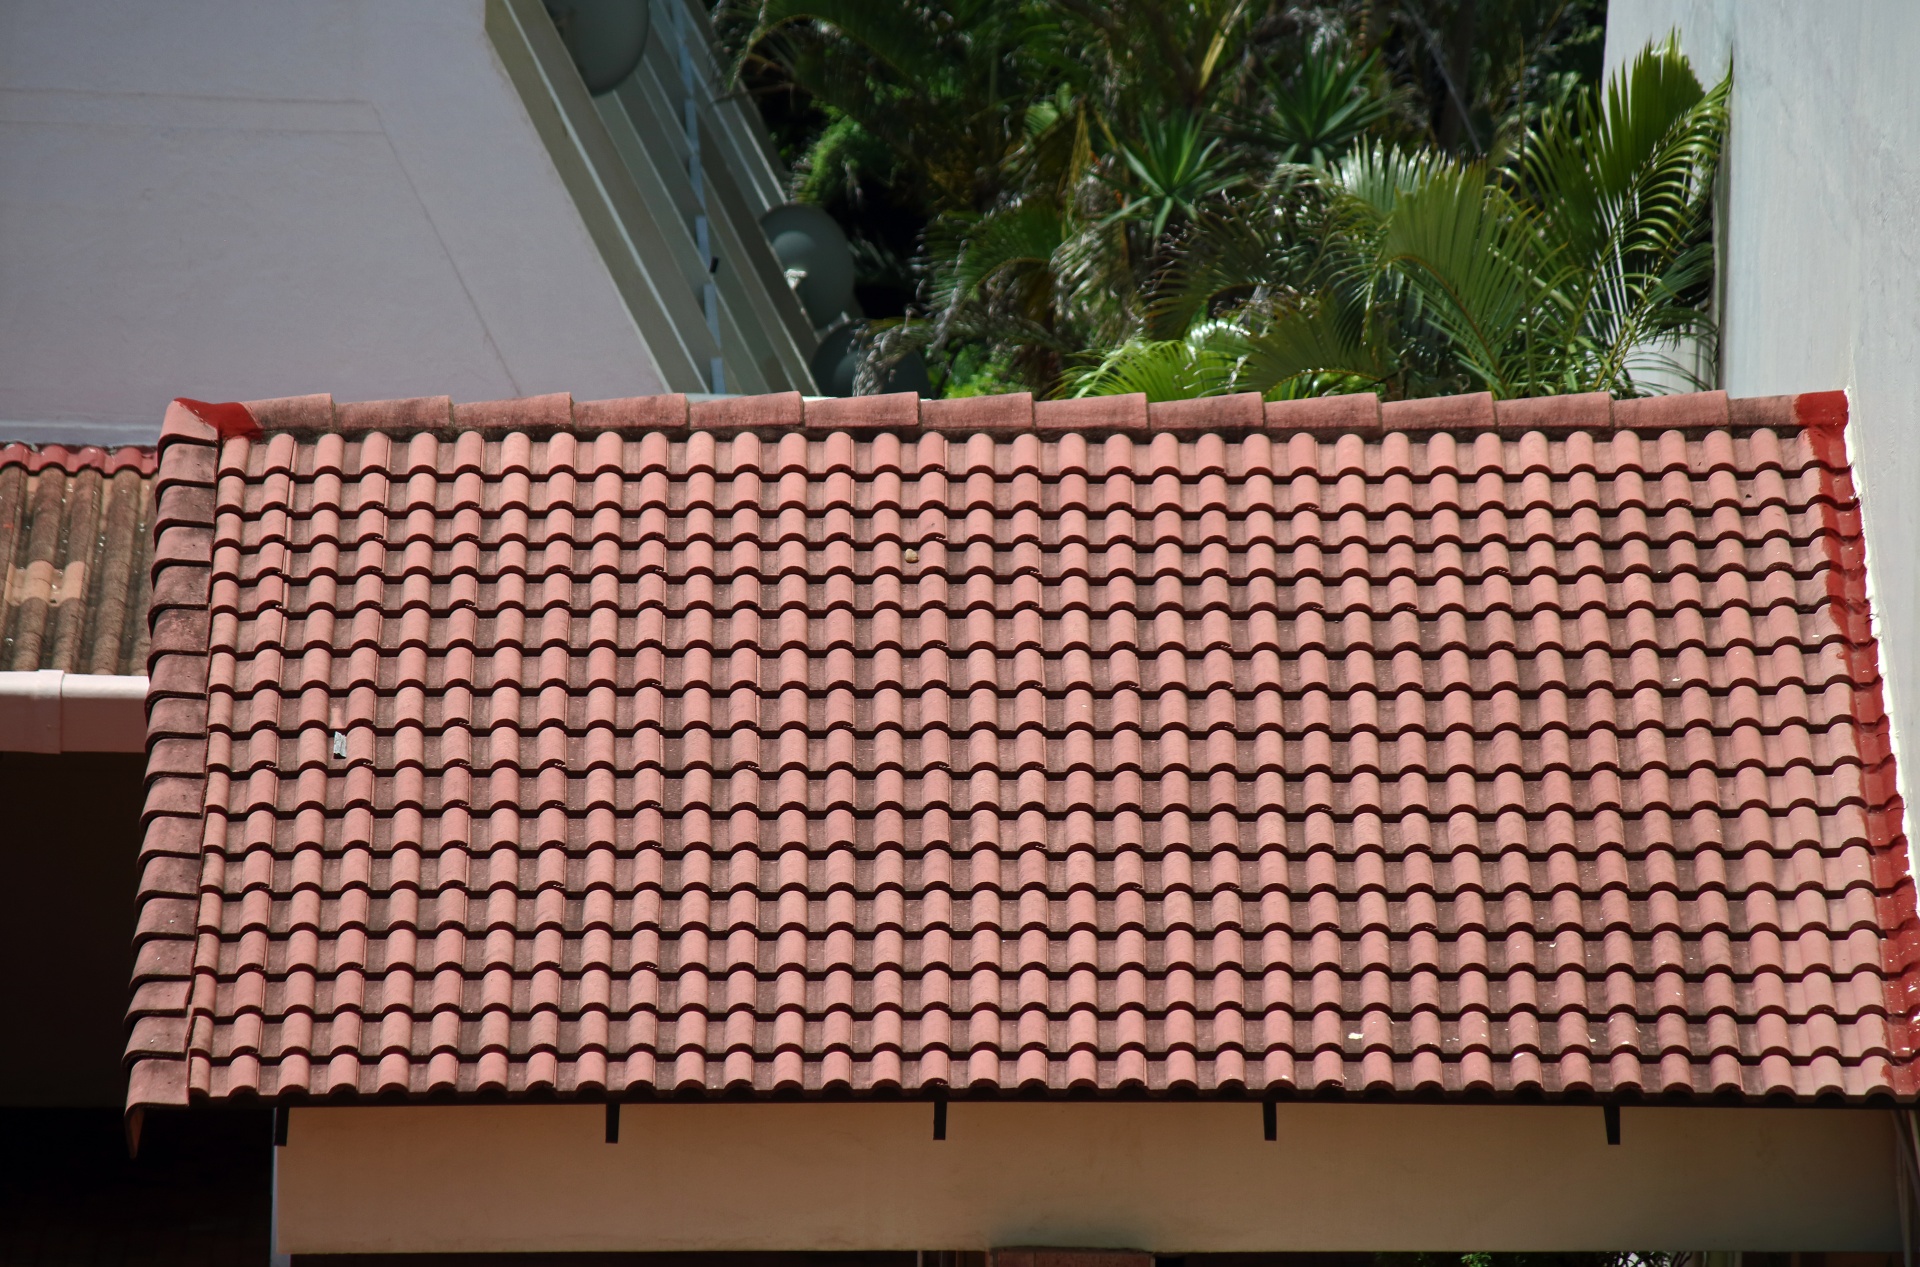 roof covered with red terracotta tiles and subtropical vegetation